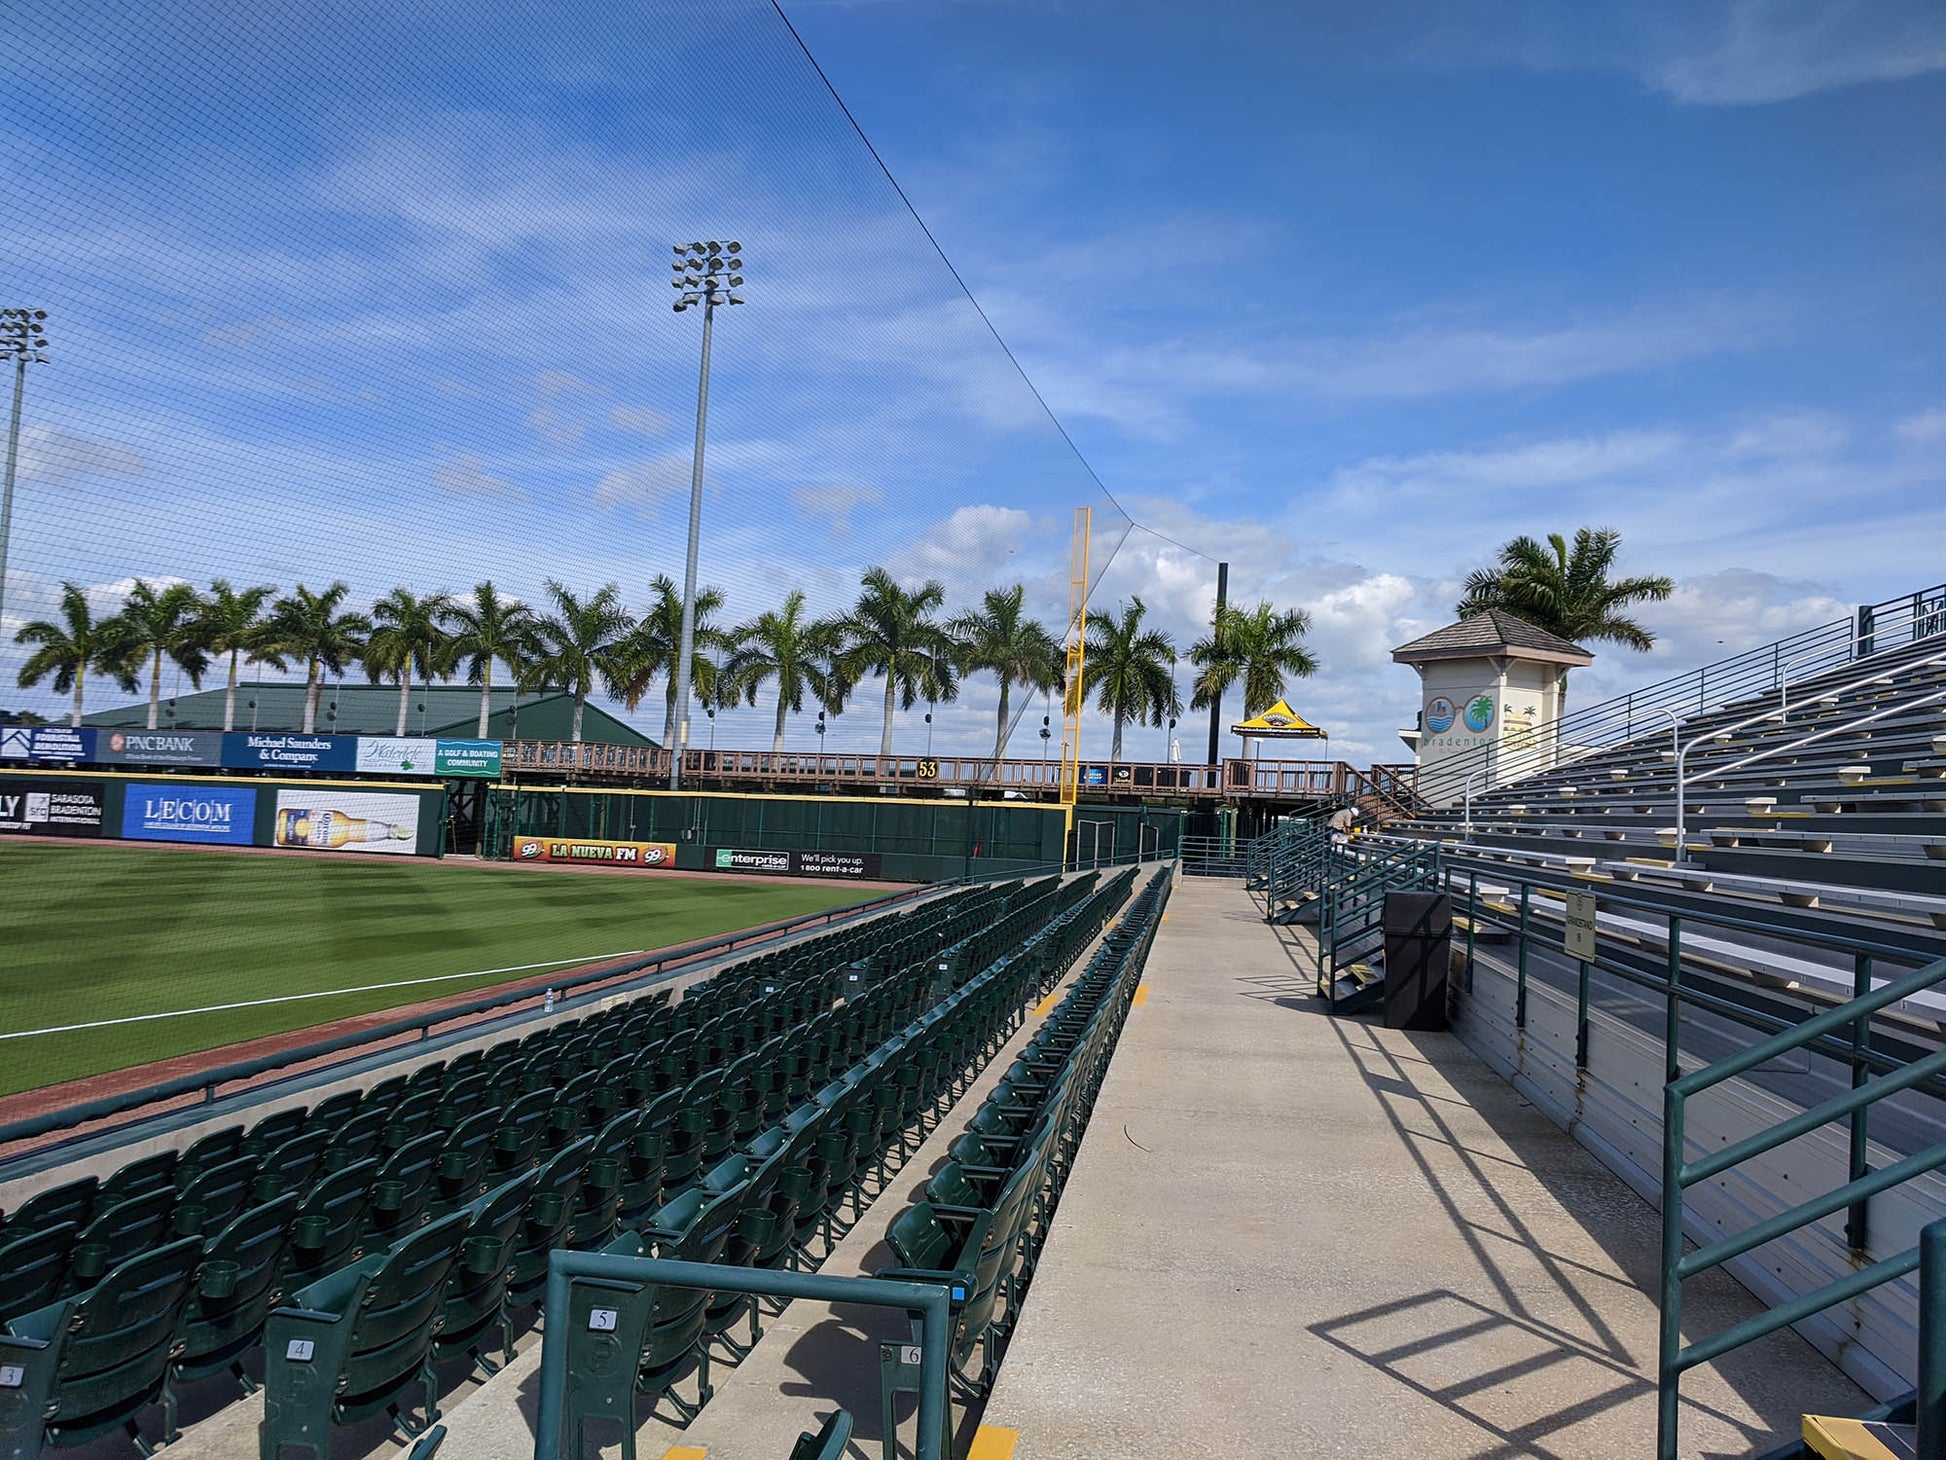 A baseball field with many green seats and palm trees.